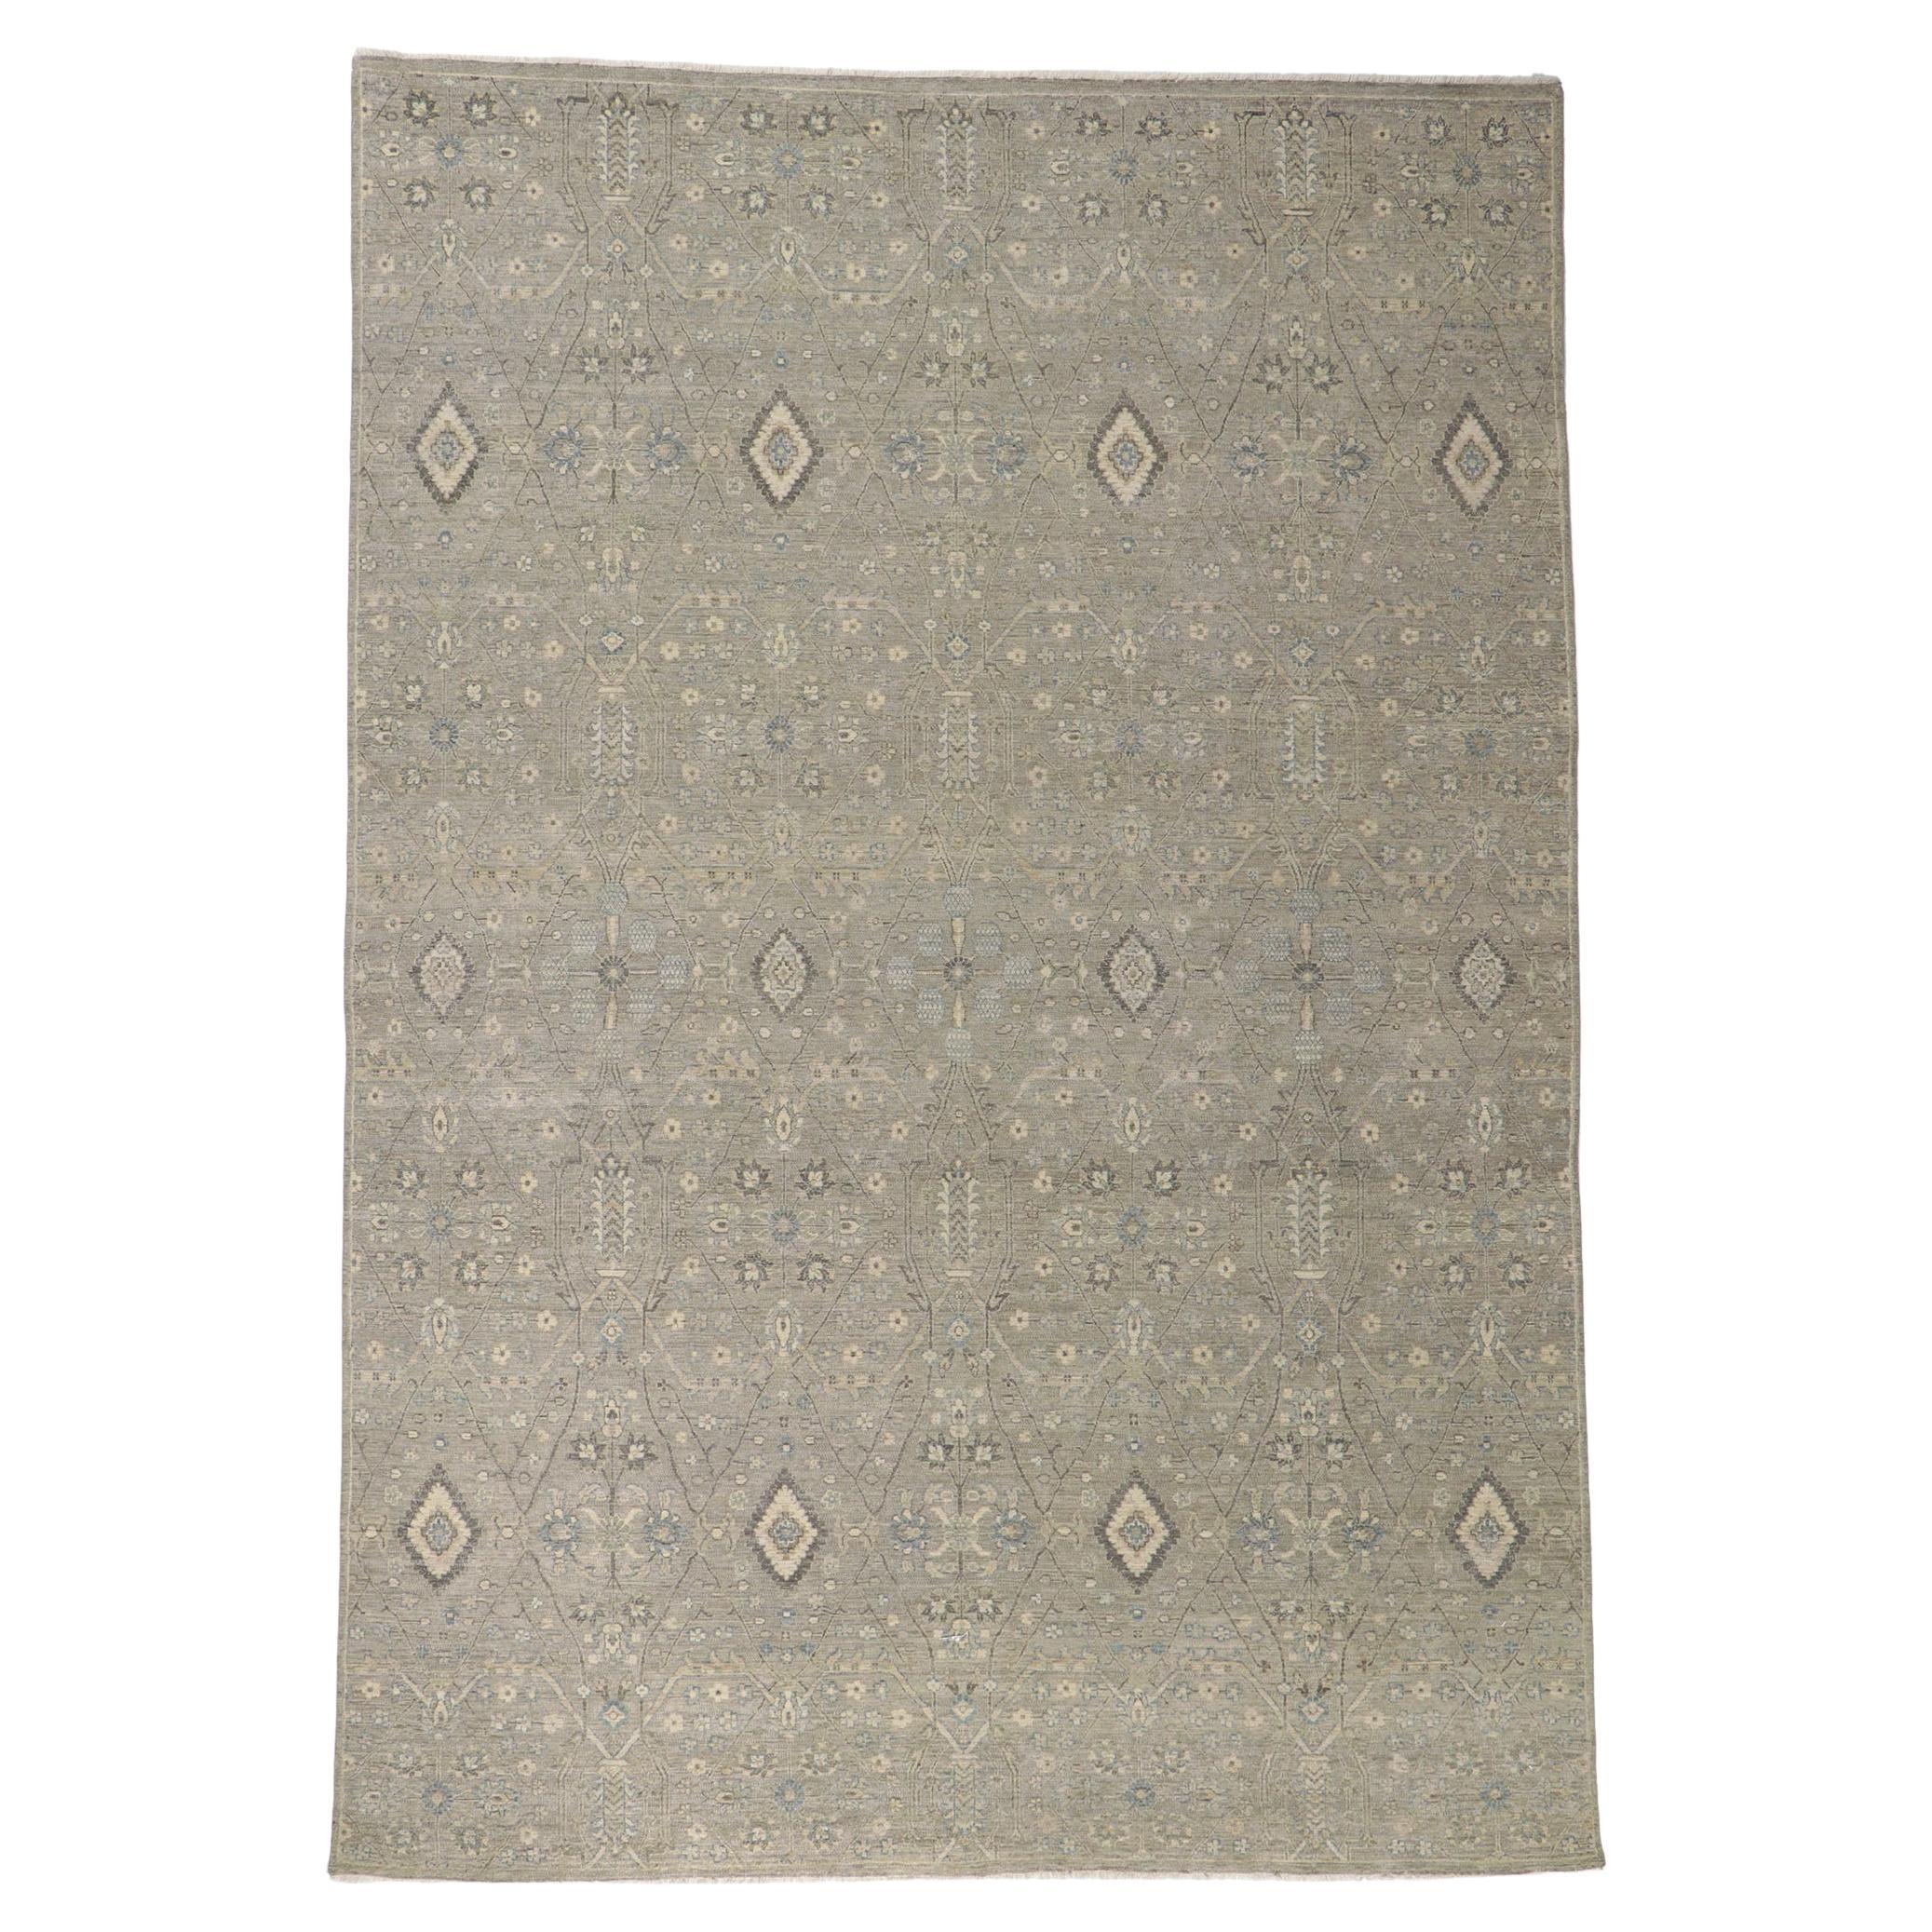 New Contemporary Distressed Rug with Modern Style